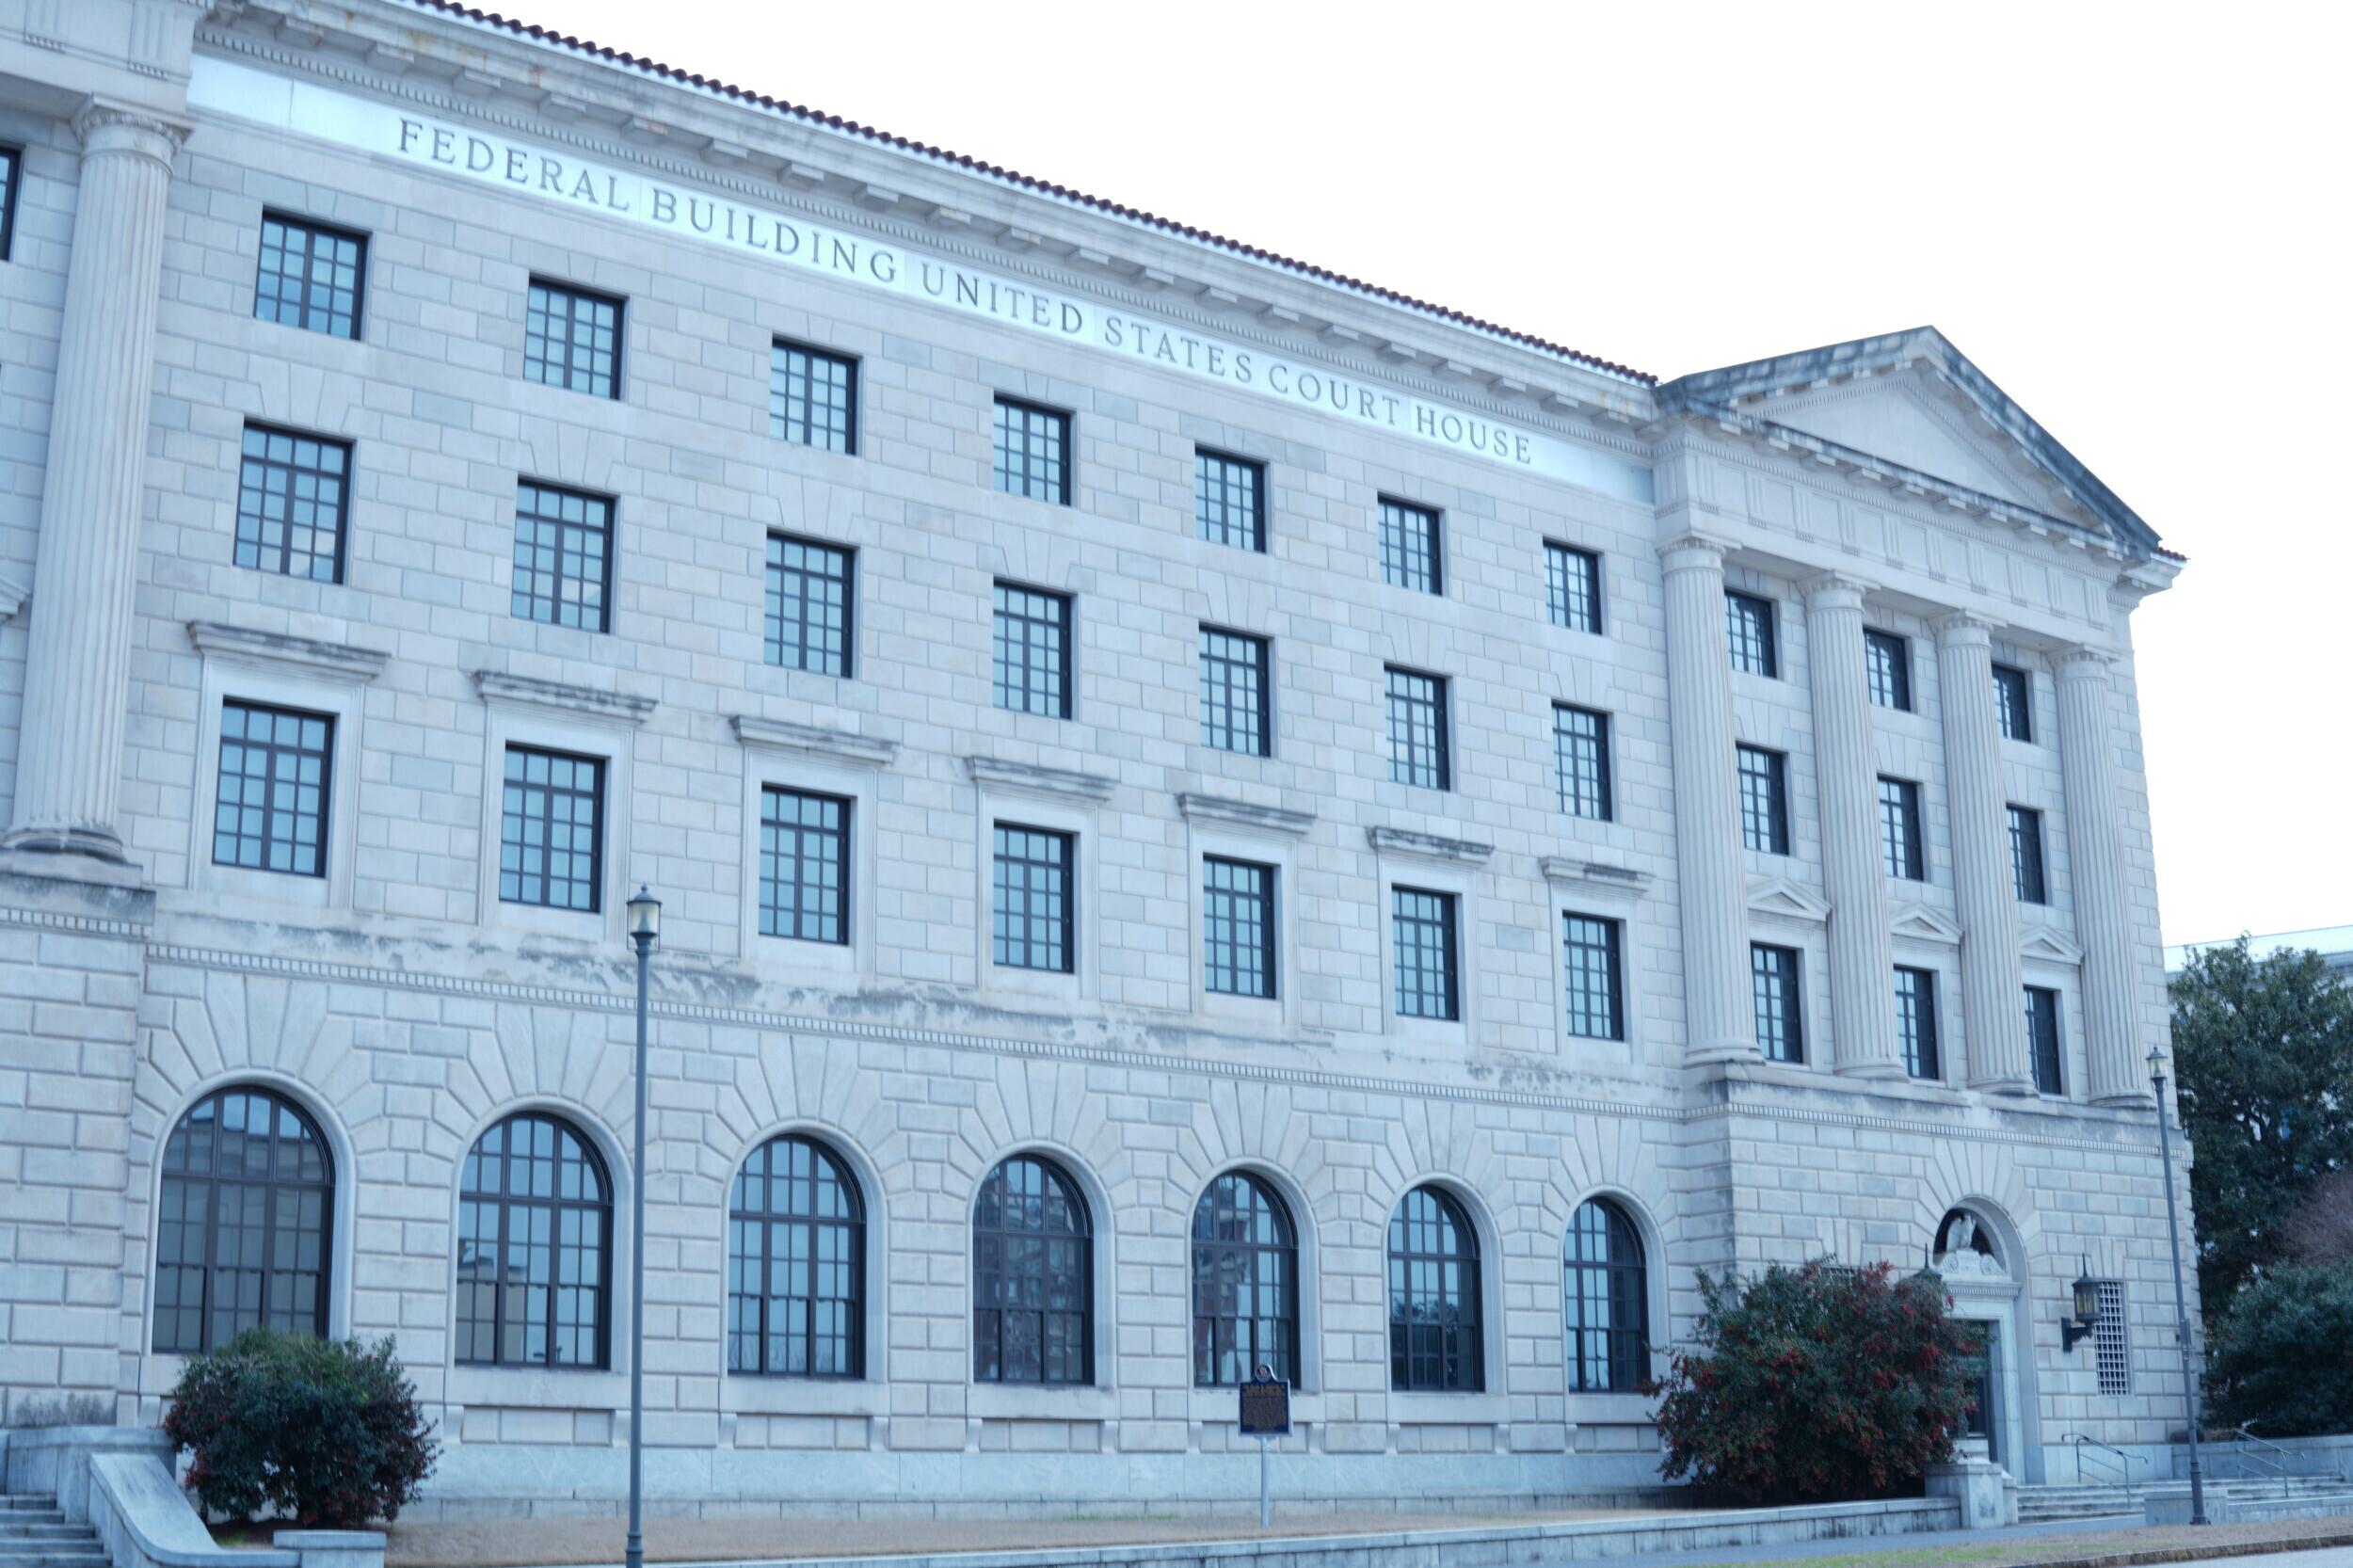 Frank M. Johnson Jr. Federal Building and United States Courthouse.Montgomery Federal Courthouse